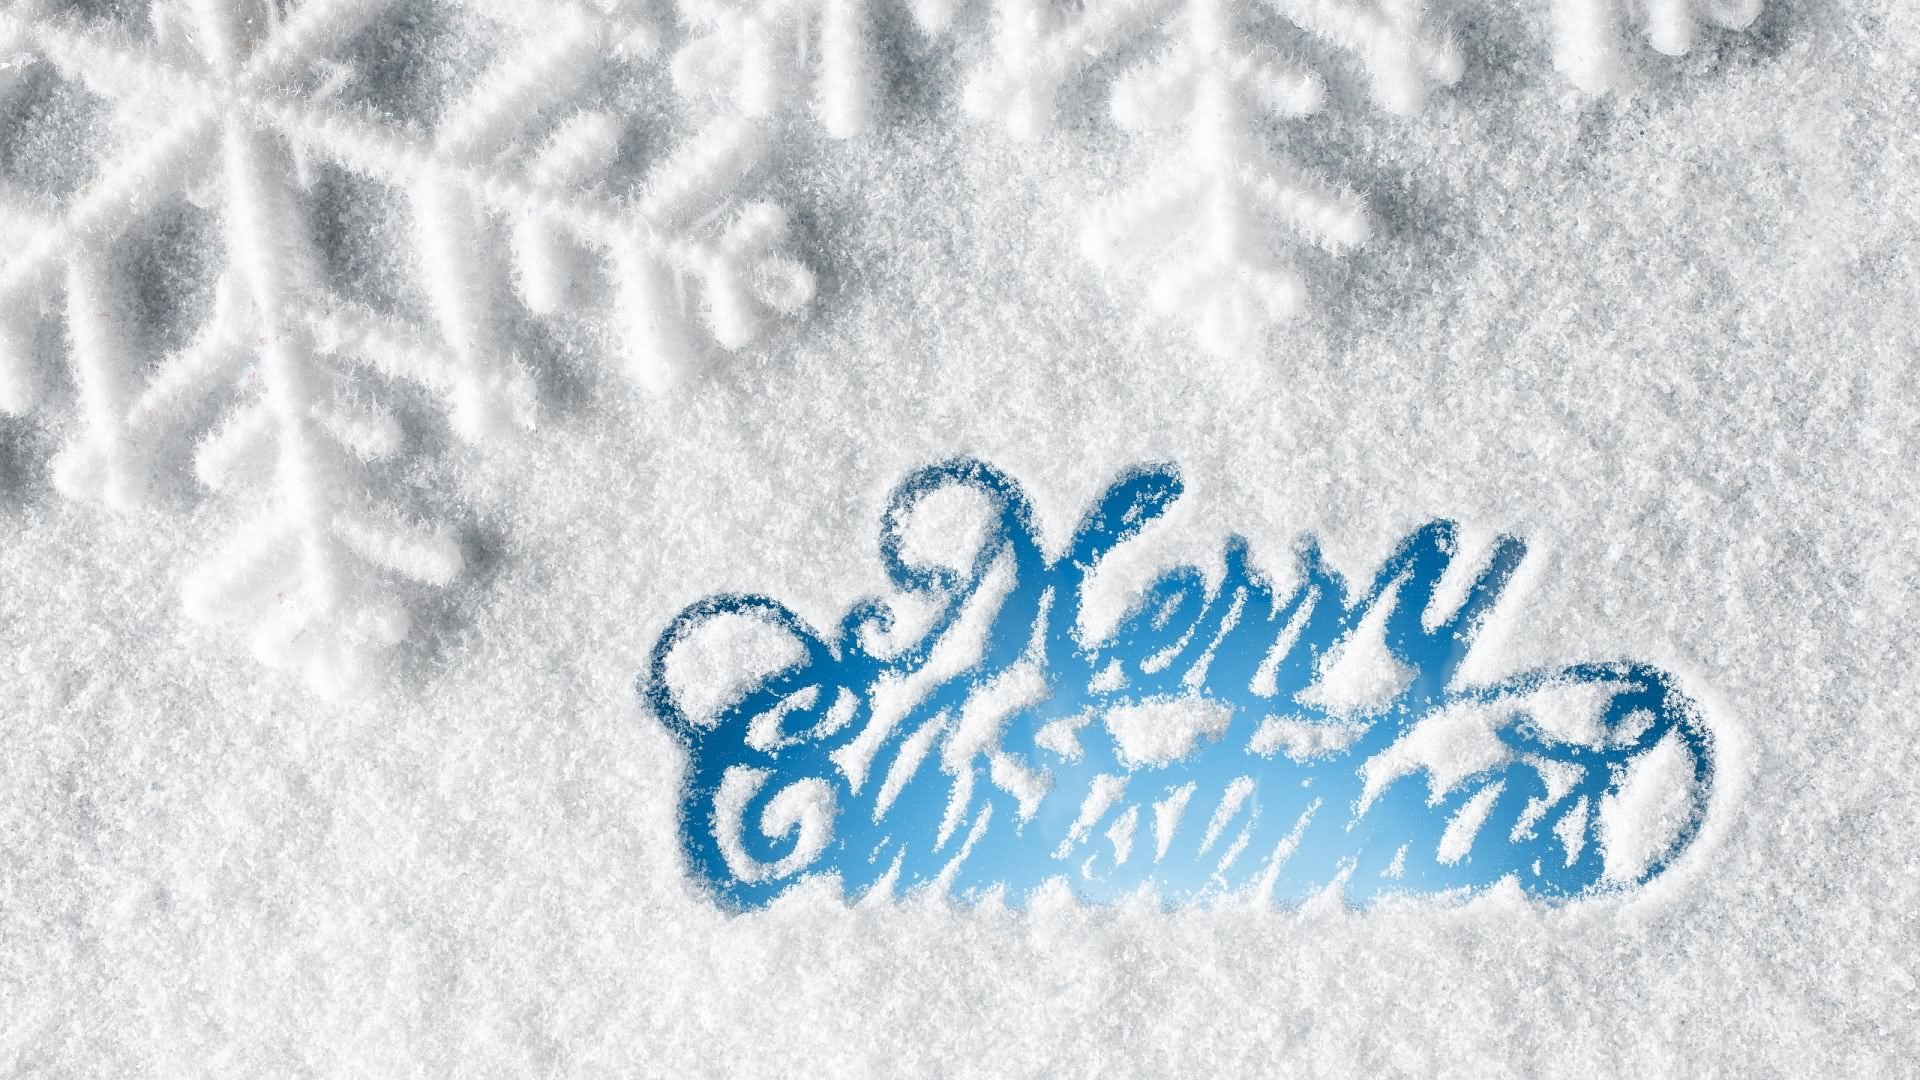 Merry Christmas Written In Snow